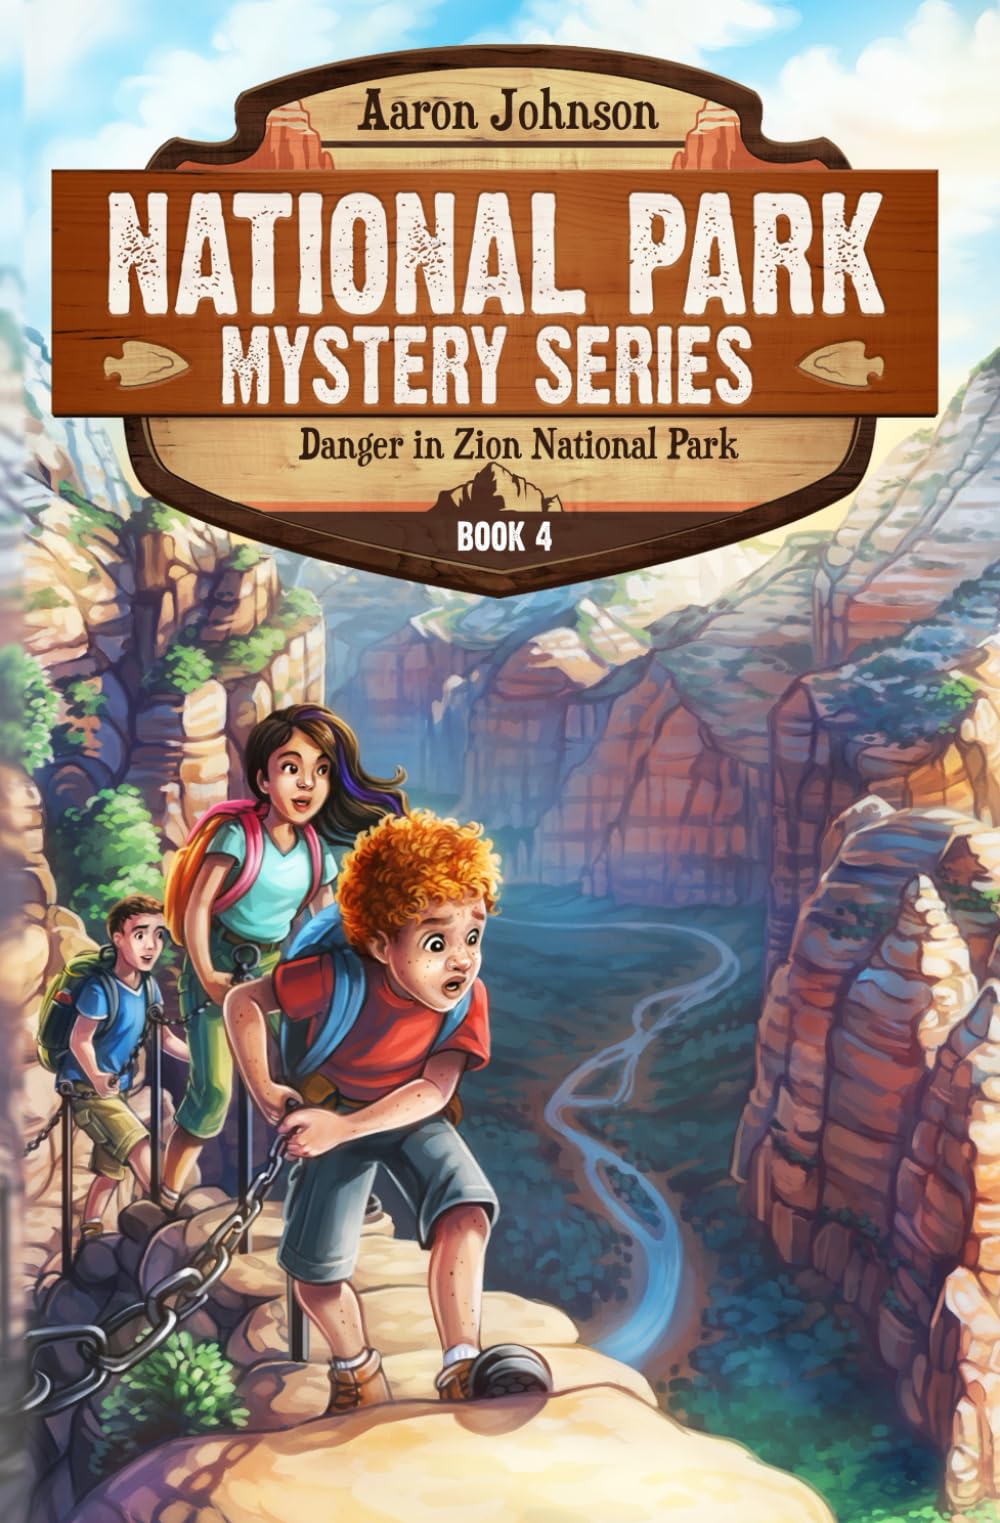 Danger in Zion National Park: A Mystery Adventure (National Park Mystery Series)